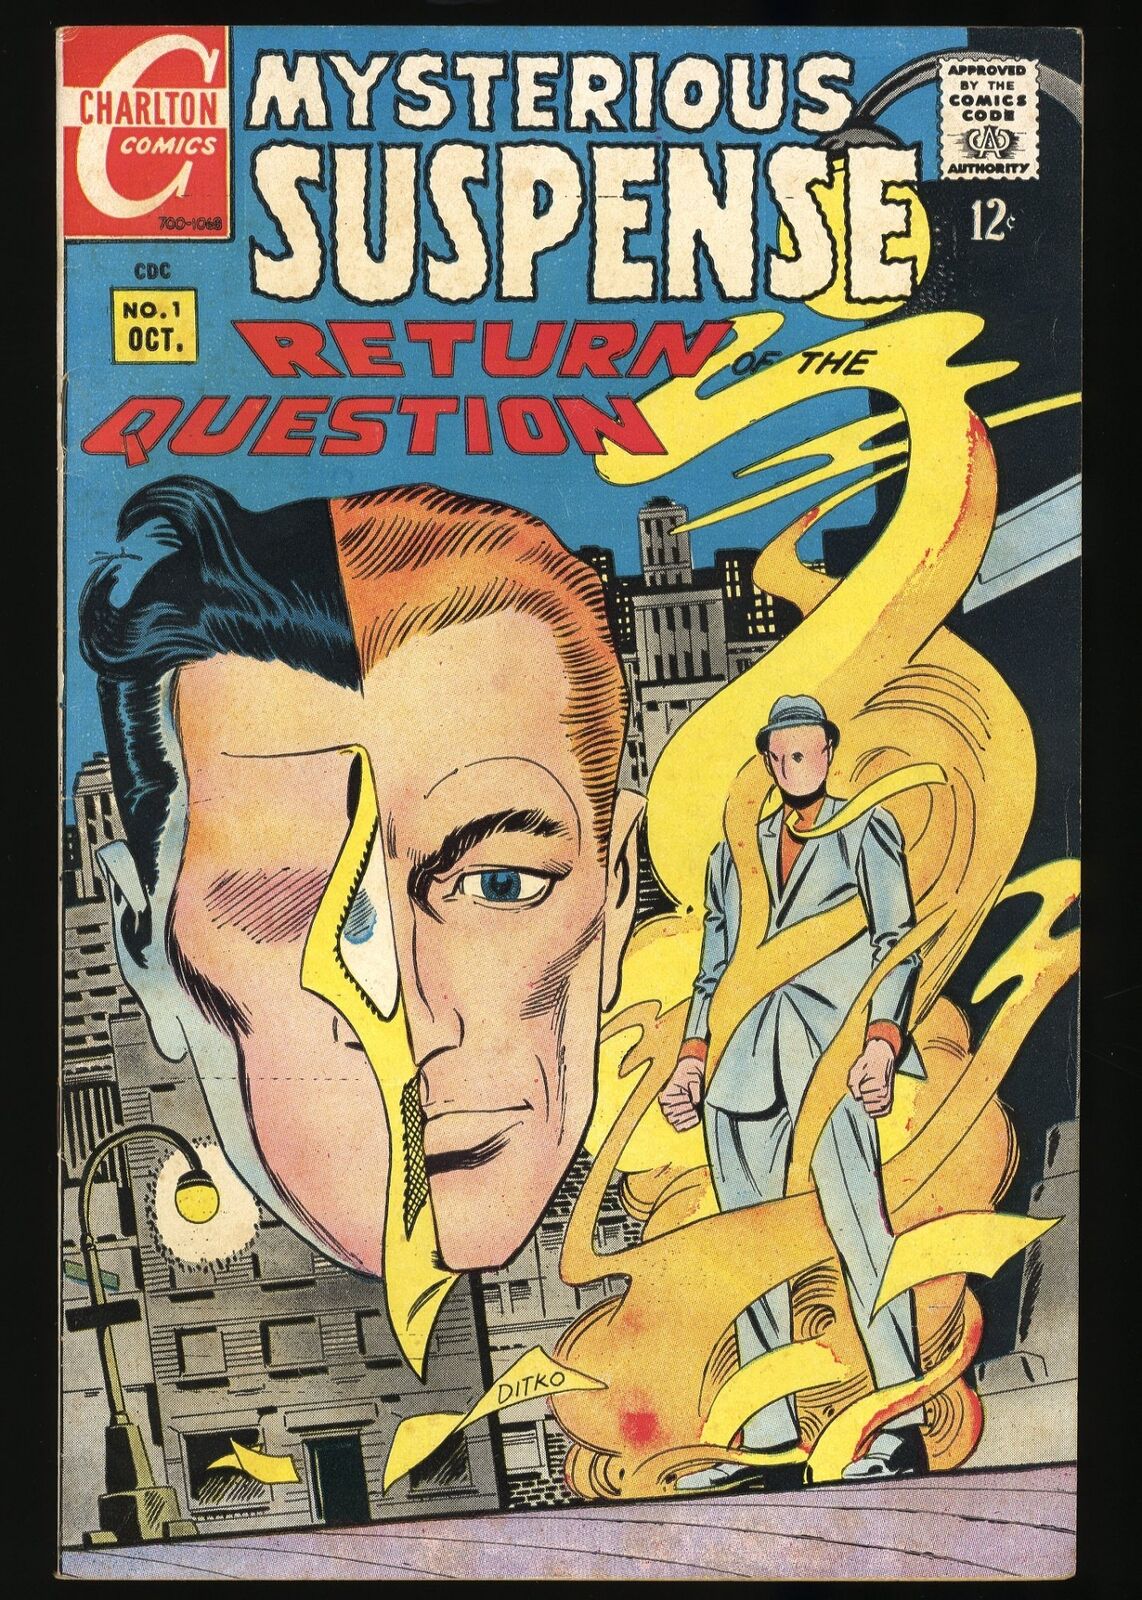 Mysterious Suspense (1968) #1 VF- 7.5 Steve Ditko Cover and Art The Question